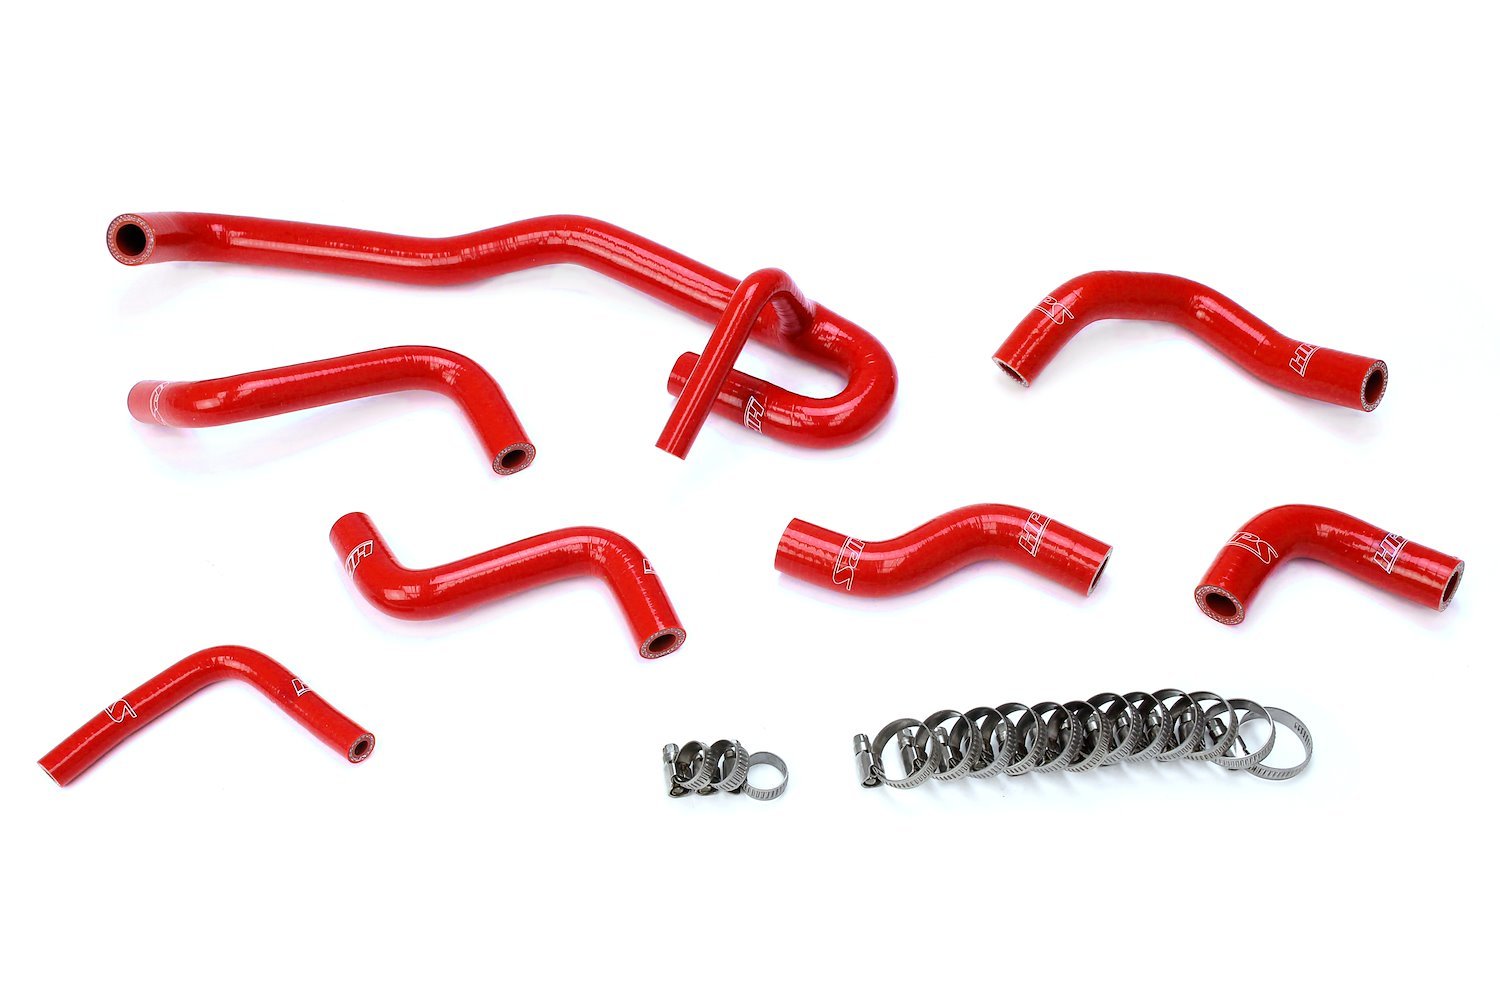 57-2190-RED Heater Hose Kit, 3-Ply Reinforced Silicone, Replaces Rubber Heater Coolant Hoses